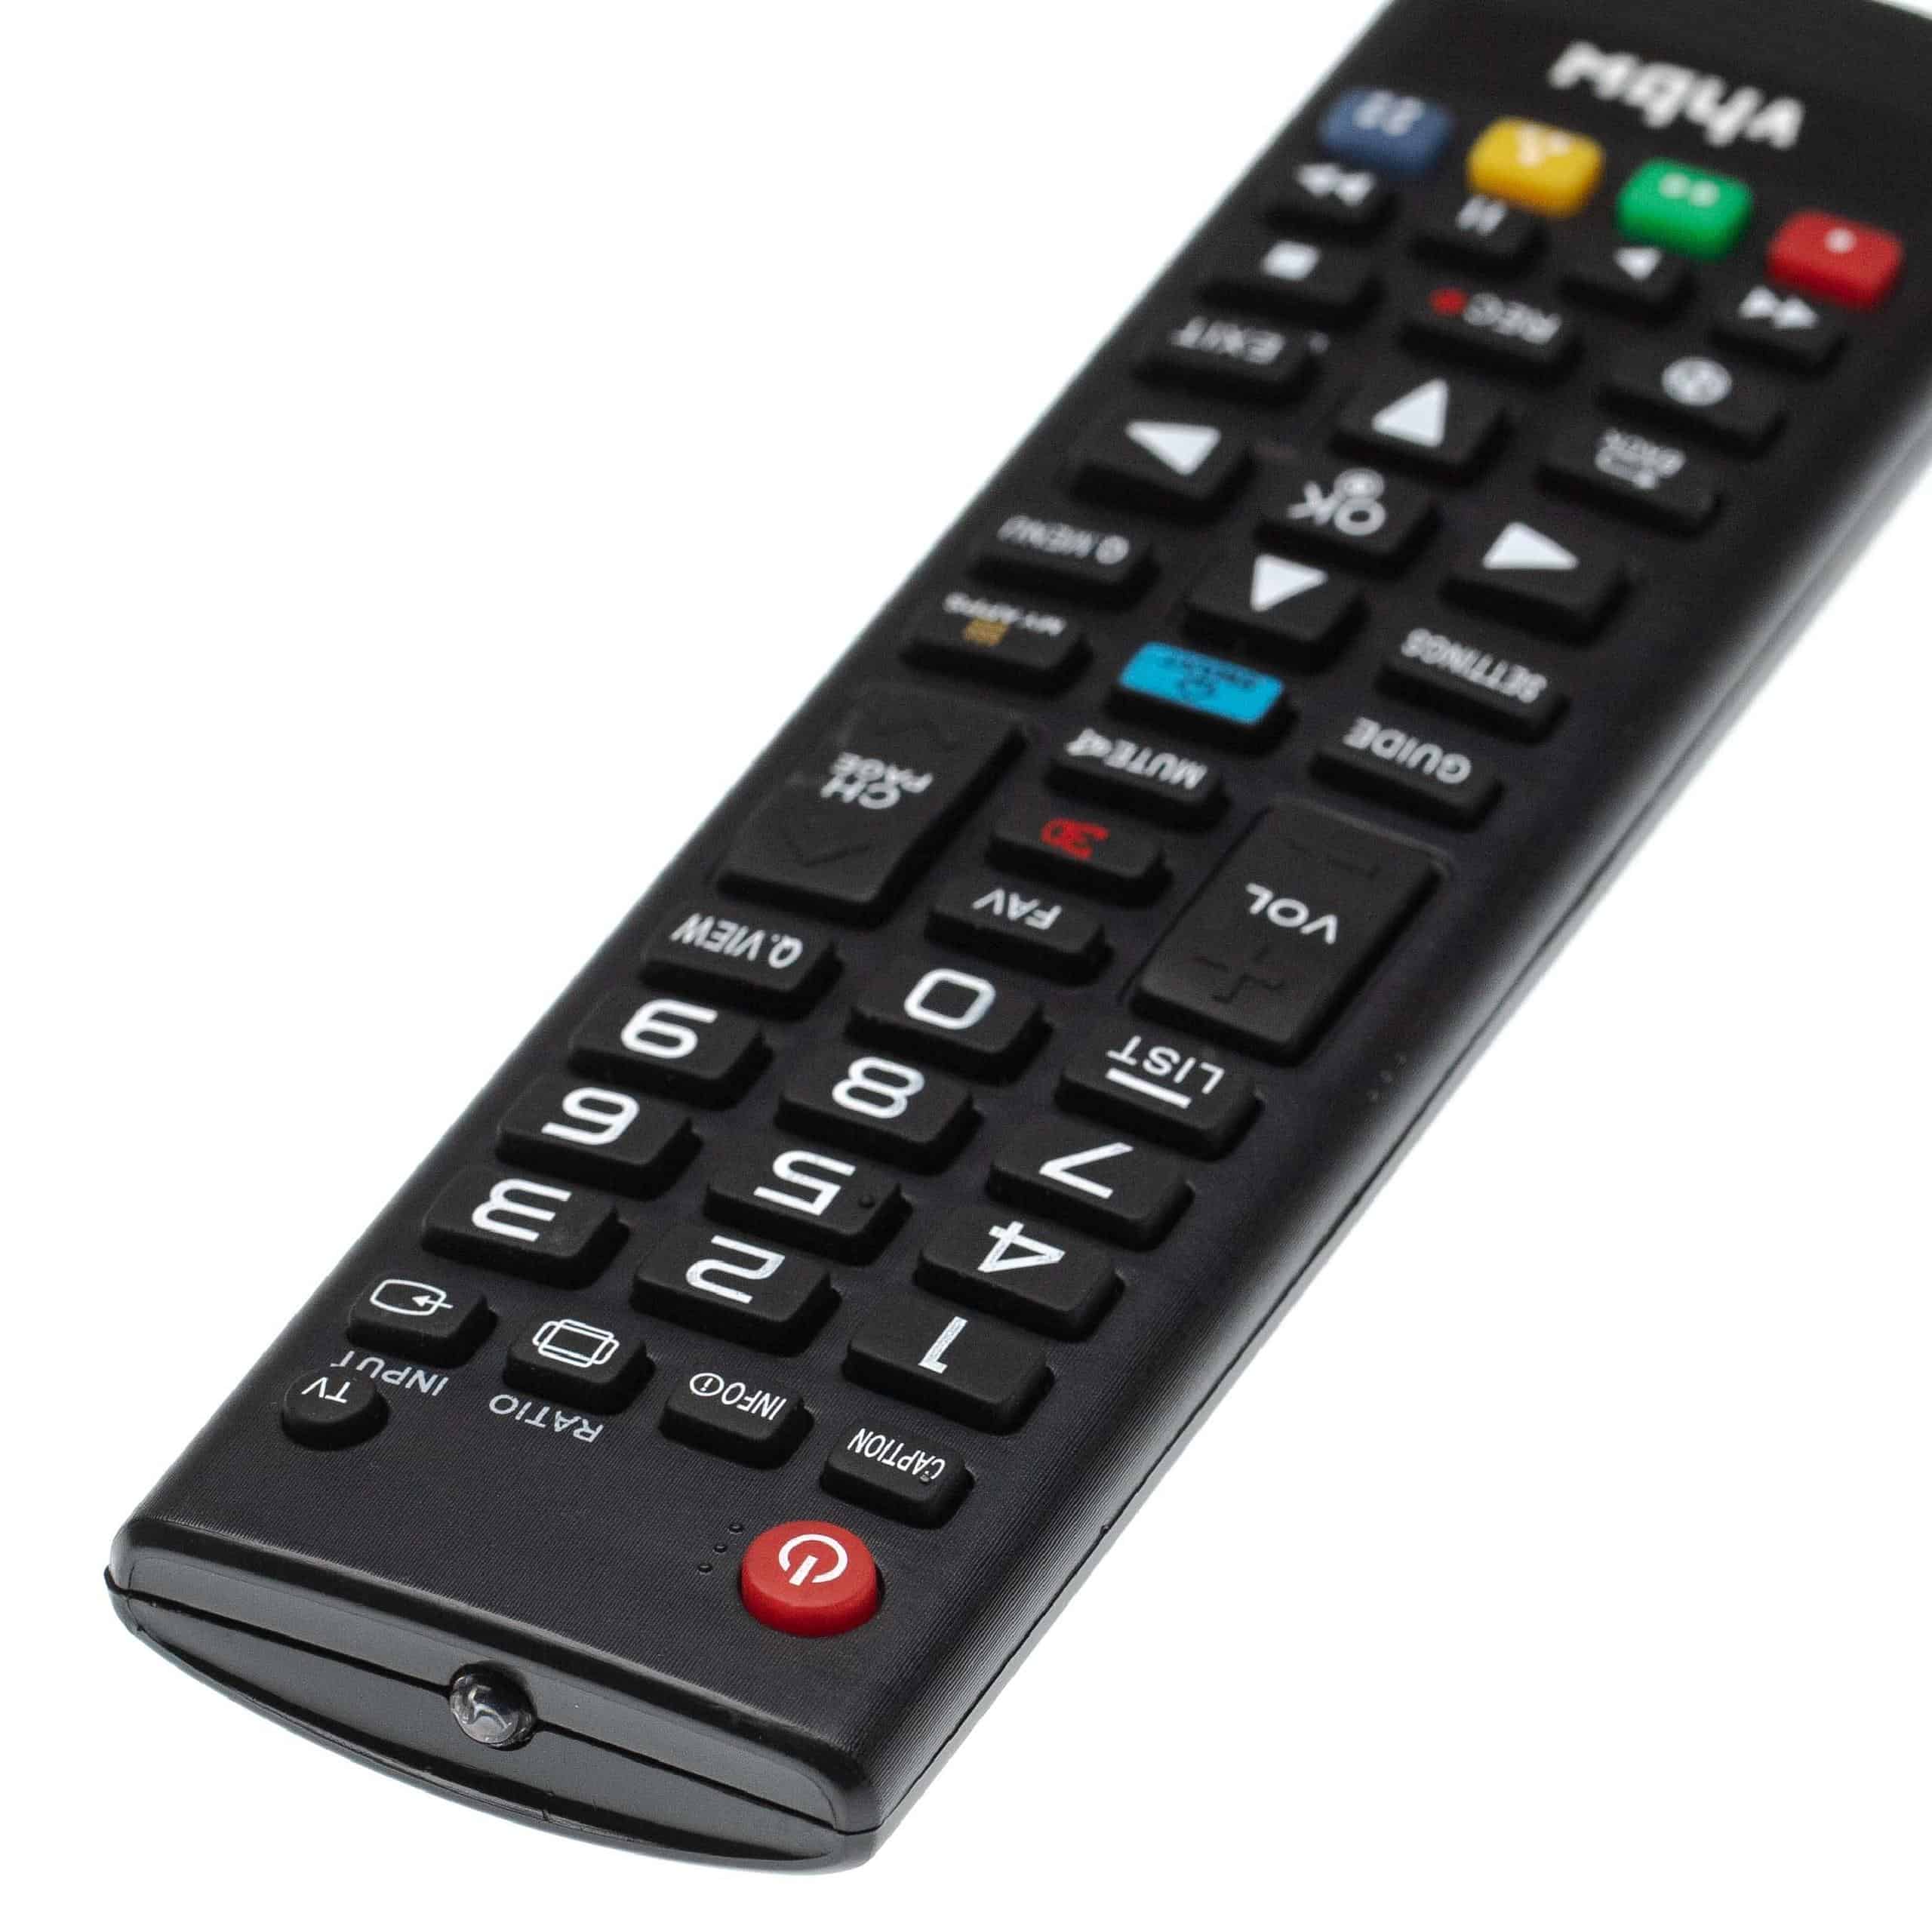 Remote Control replaces LG AKB73975702 for LG TV